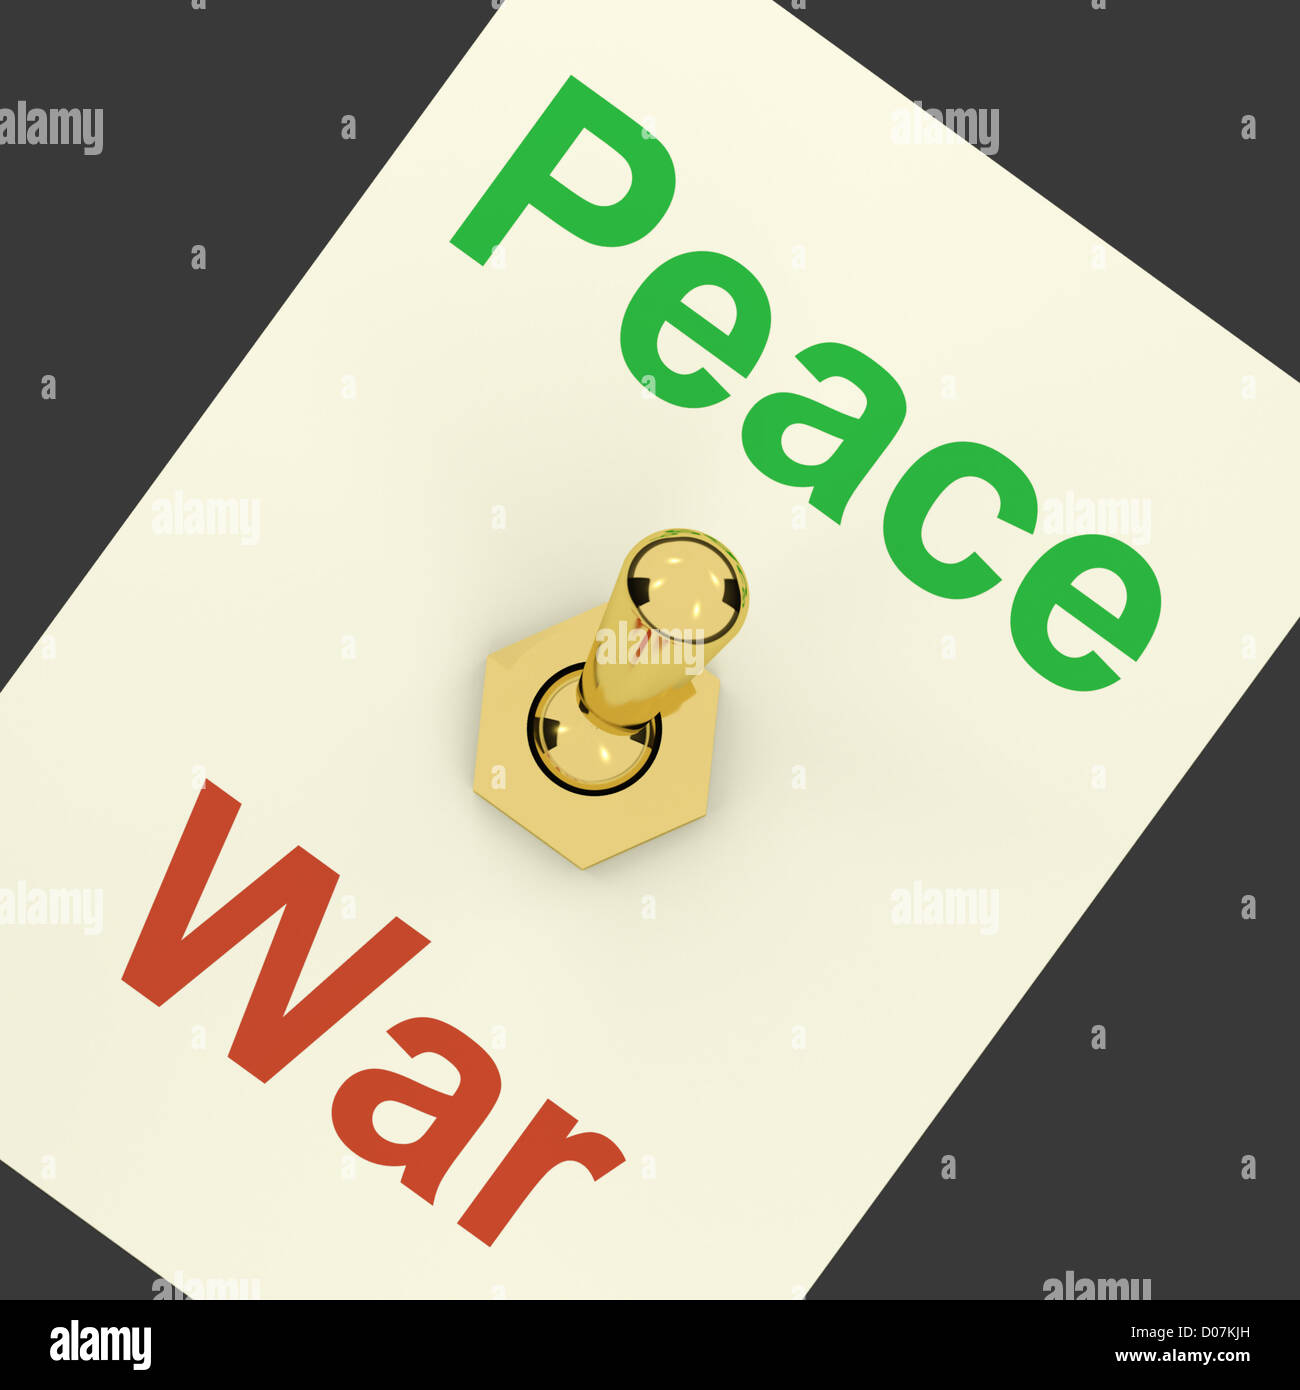 Peace War Switch Showing No Conflicts Or Aggression Stock Photo